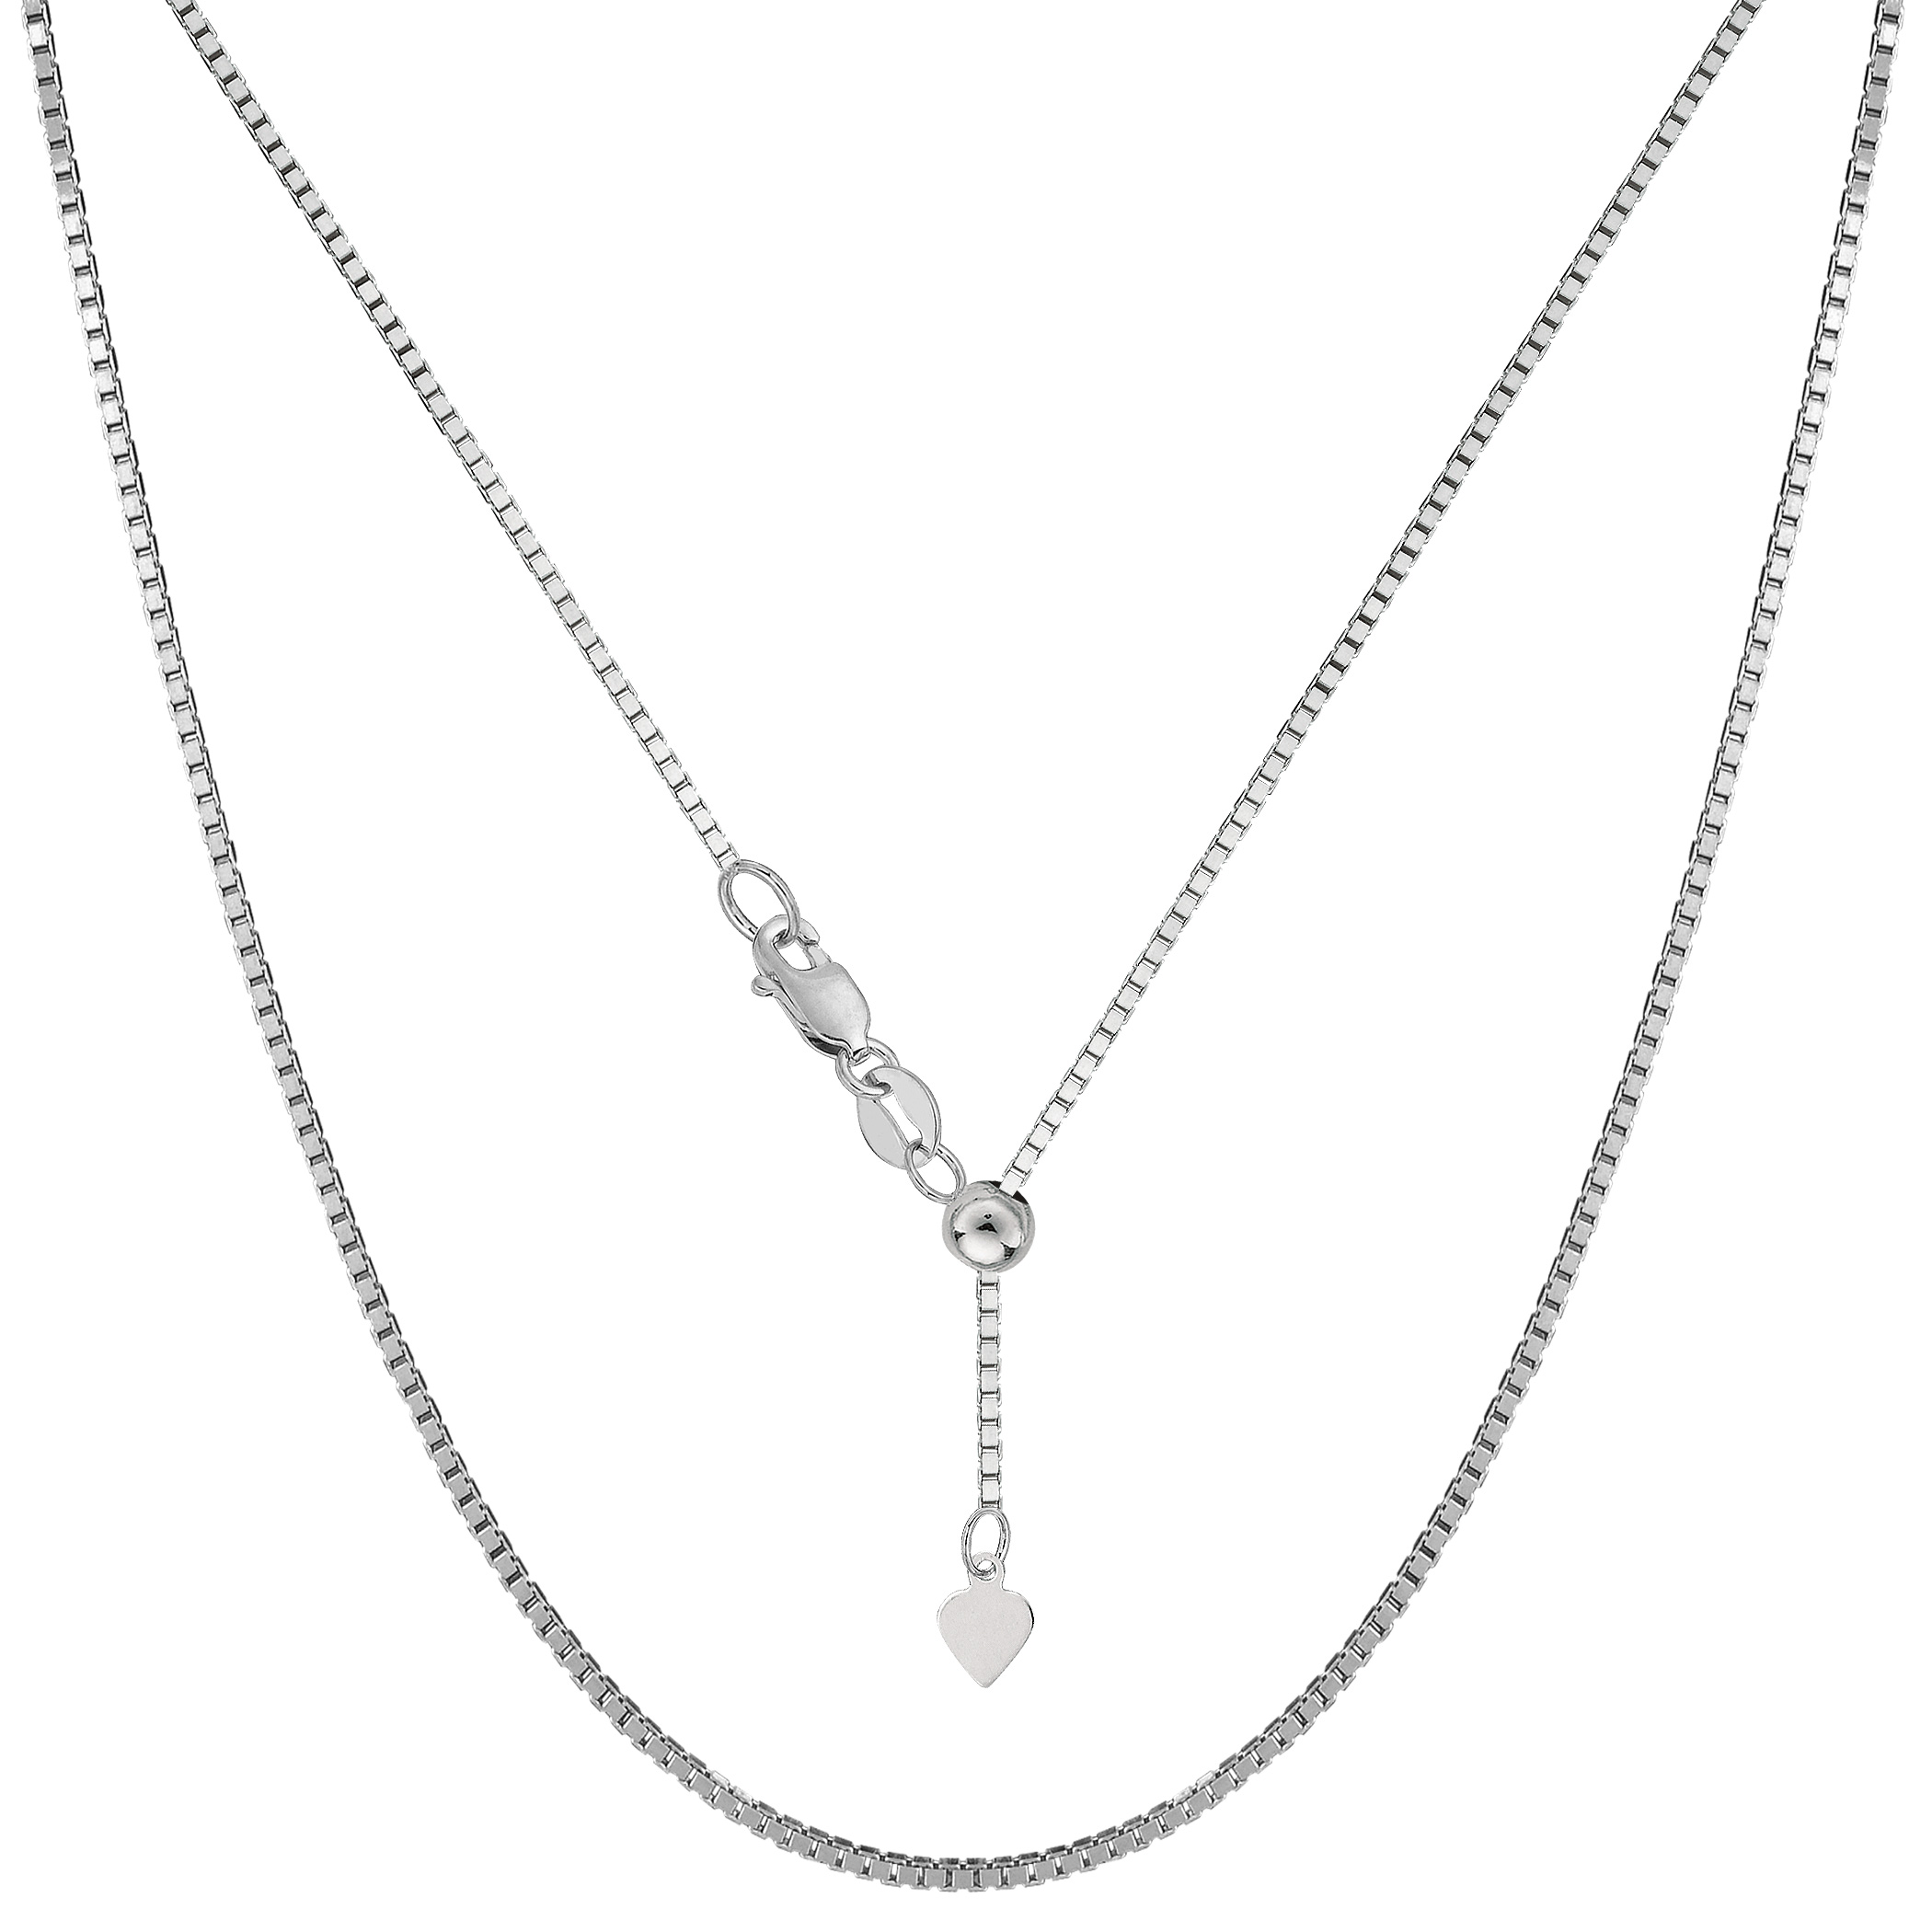 Jewelry Affairs 14k White Gold Adjustable Box Link Chain Necklace, 1.15mm, 22"